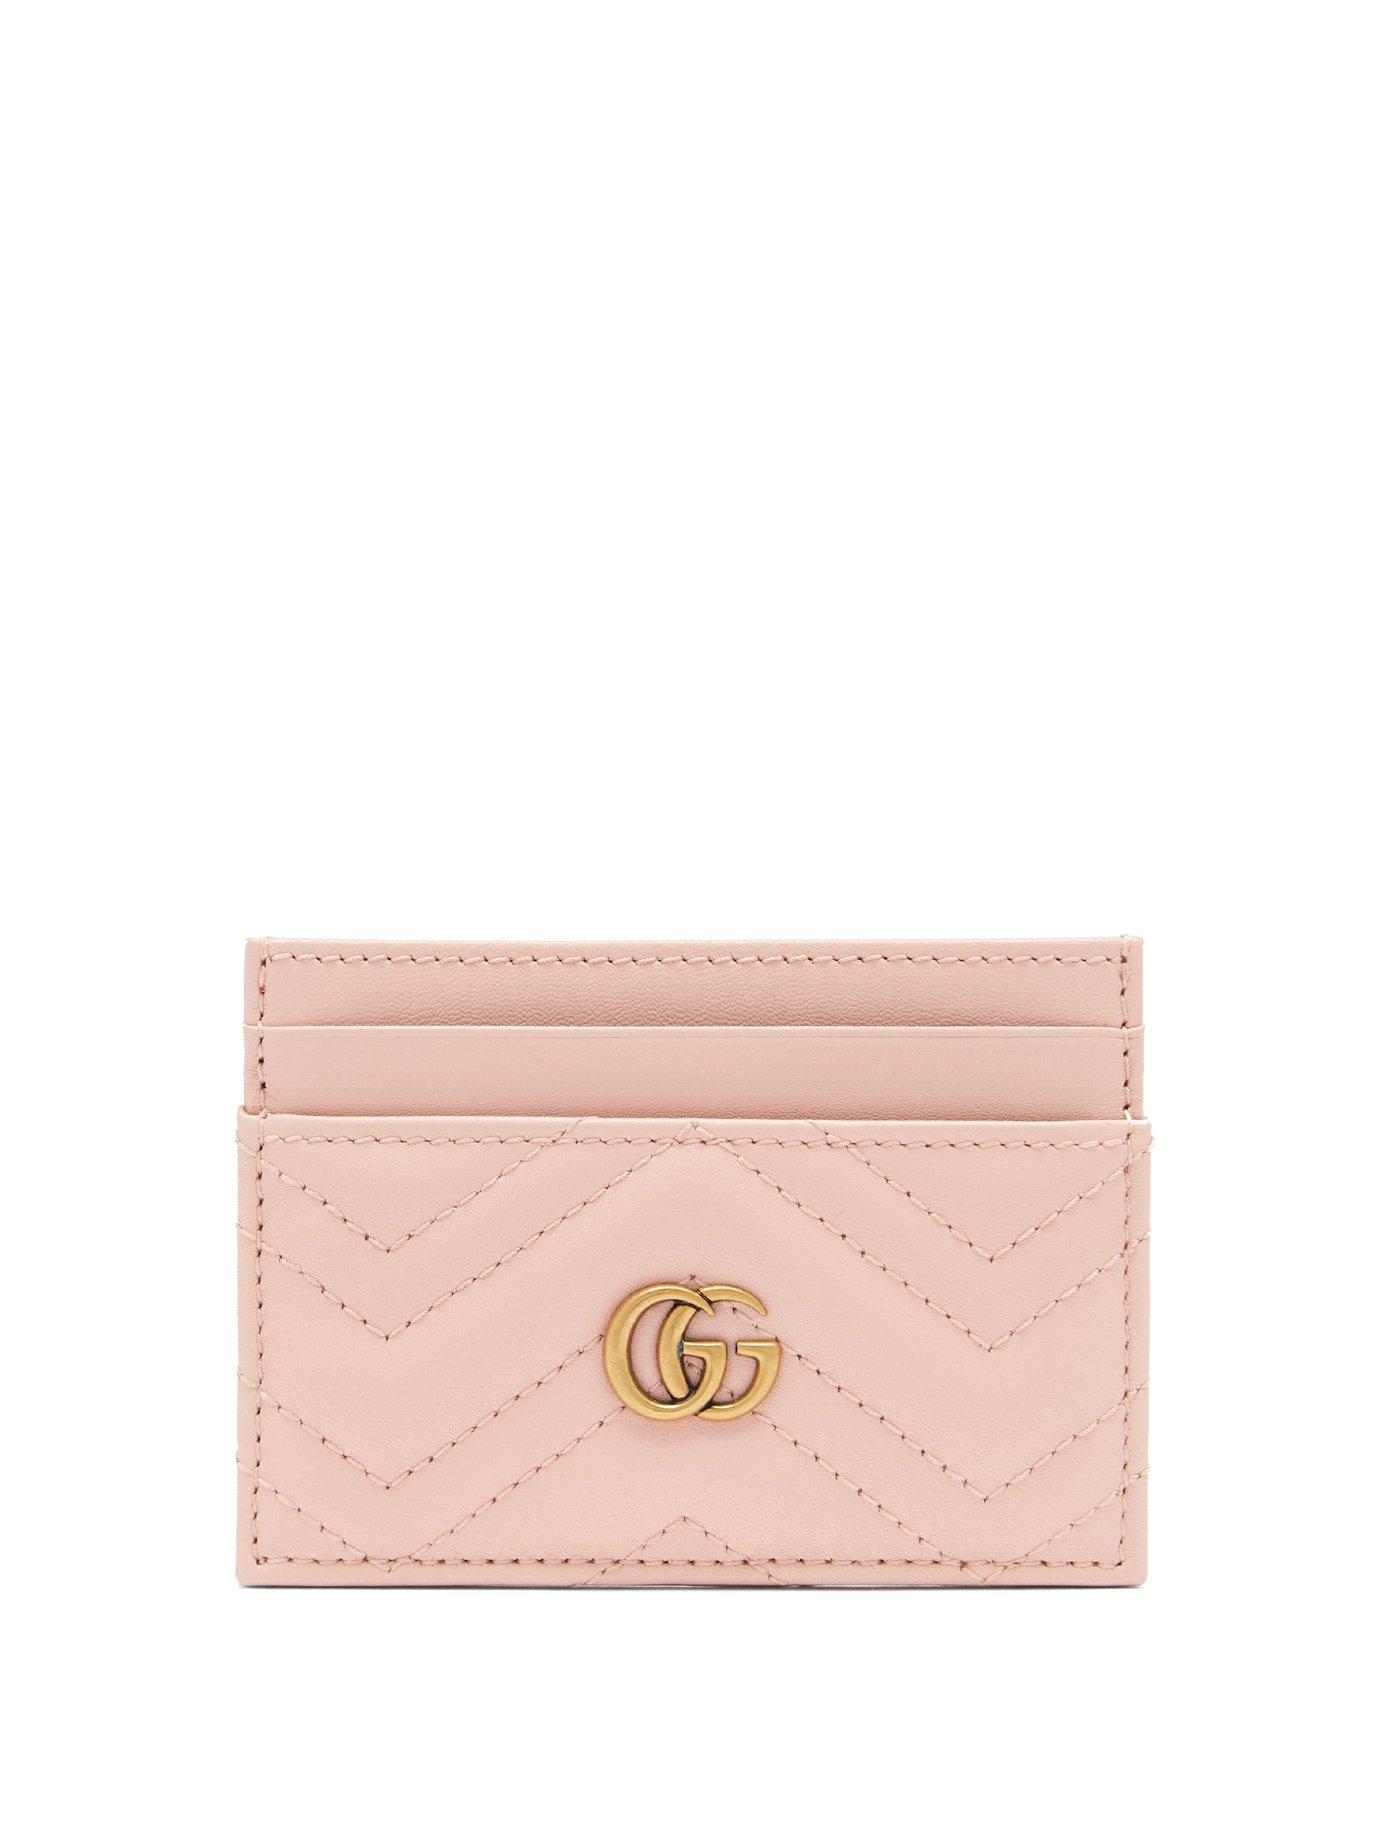 Gucci Gg Marmont Quilted Leather Cardholder In Light Pink | ModeSens